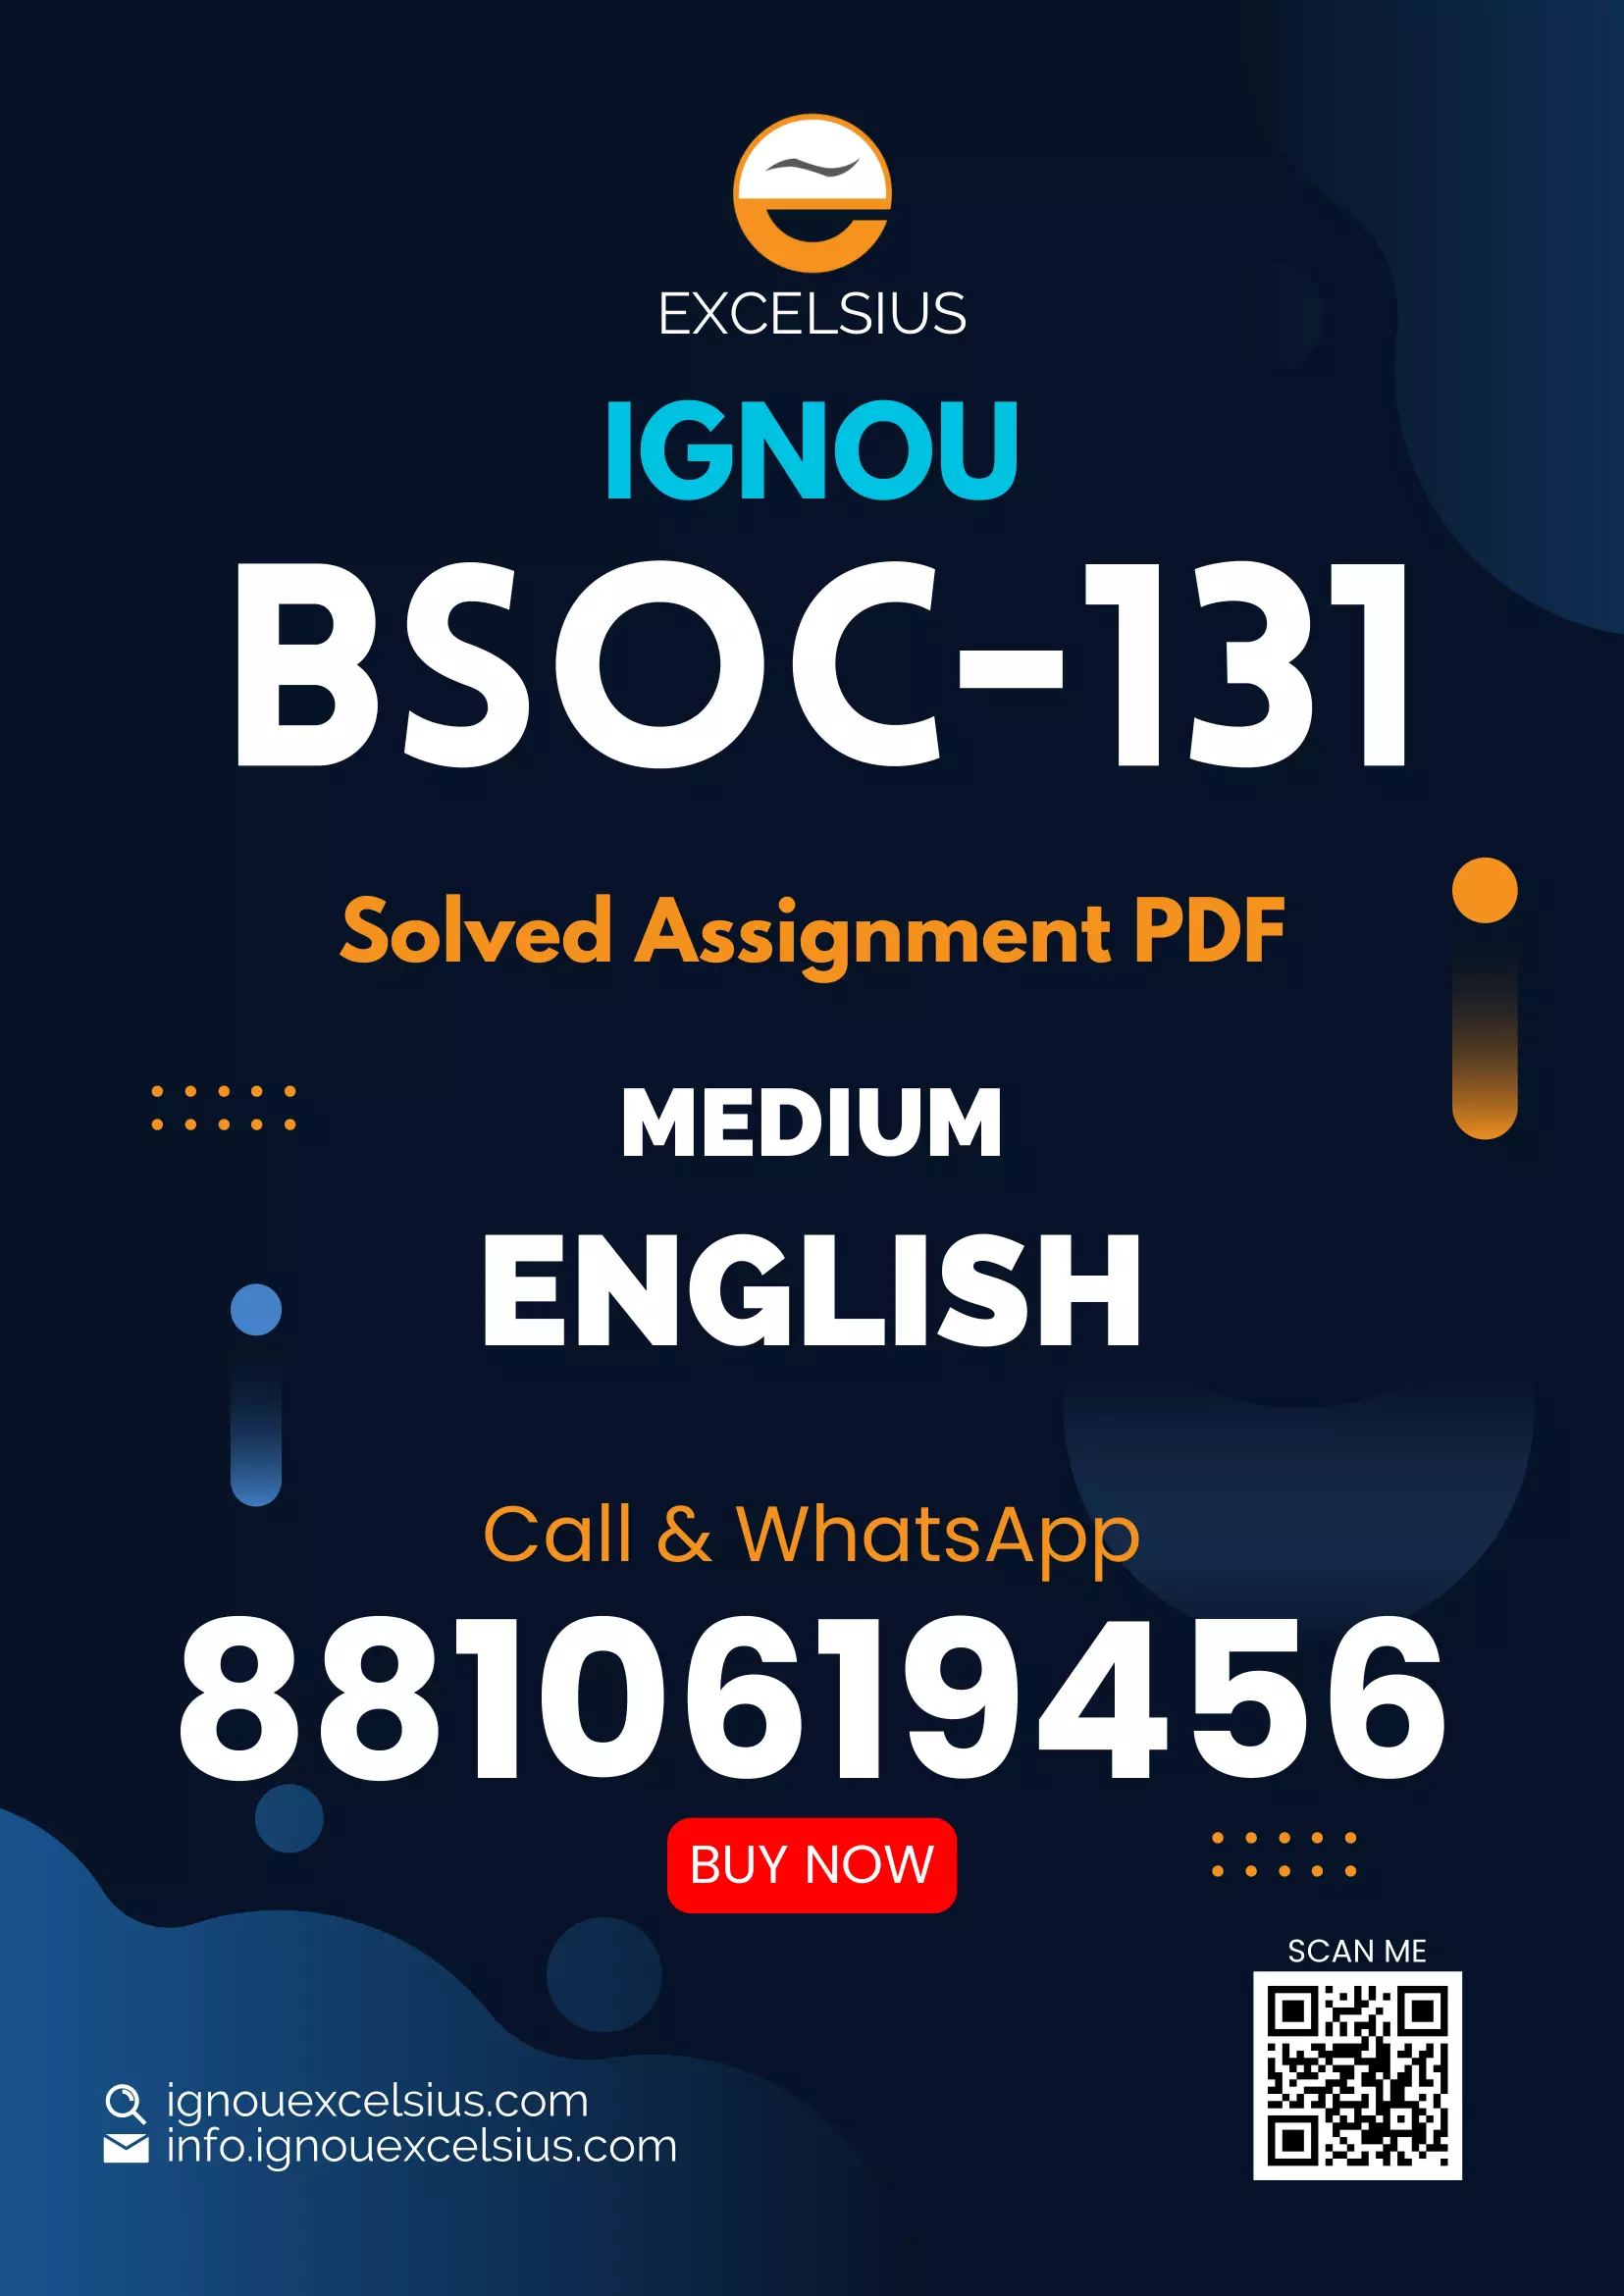 IGNOU BSOC-131 - Introduction to Sociology, Latest Solved Assignment-July 2022 – January 2023